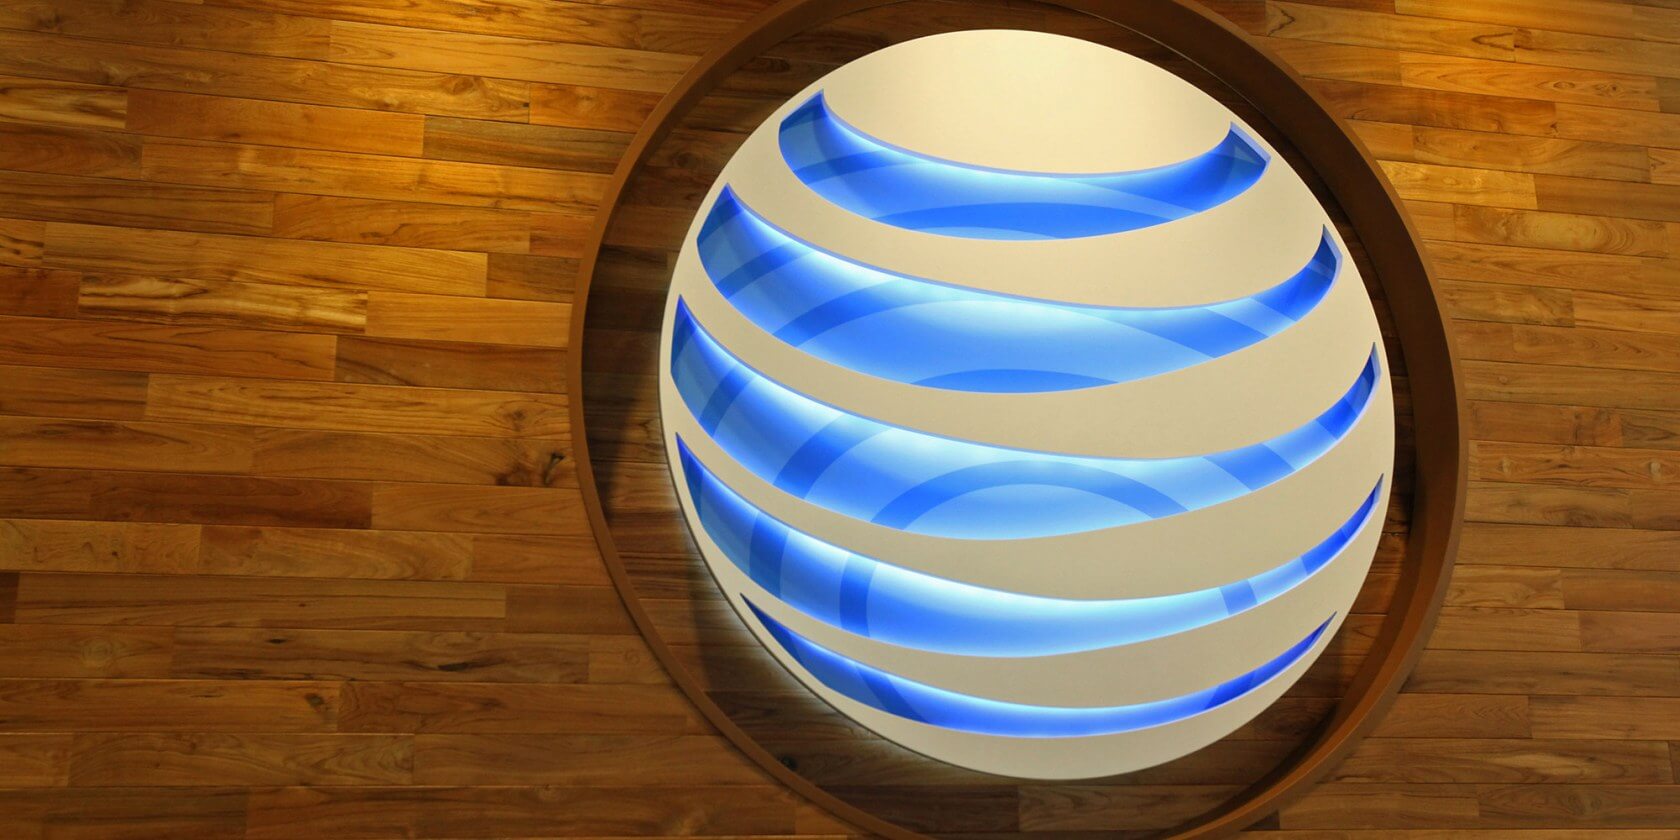 AT&T automatically gives customers a 'bonus' 15GB of data, along with a $10 price increase